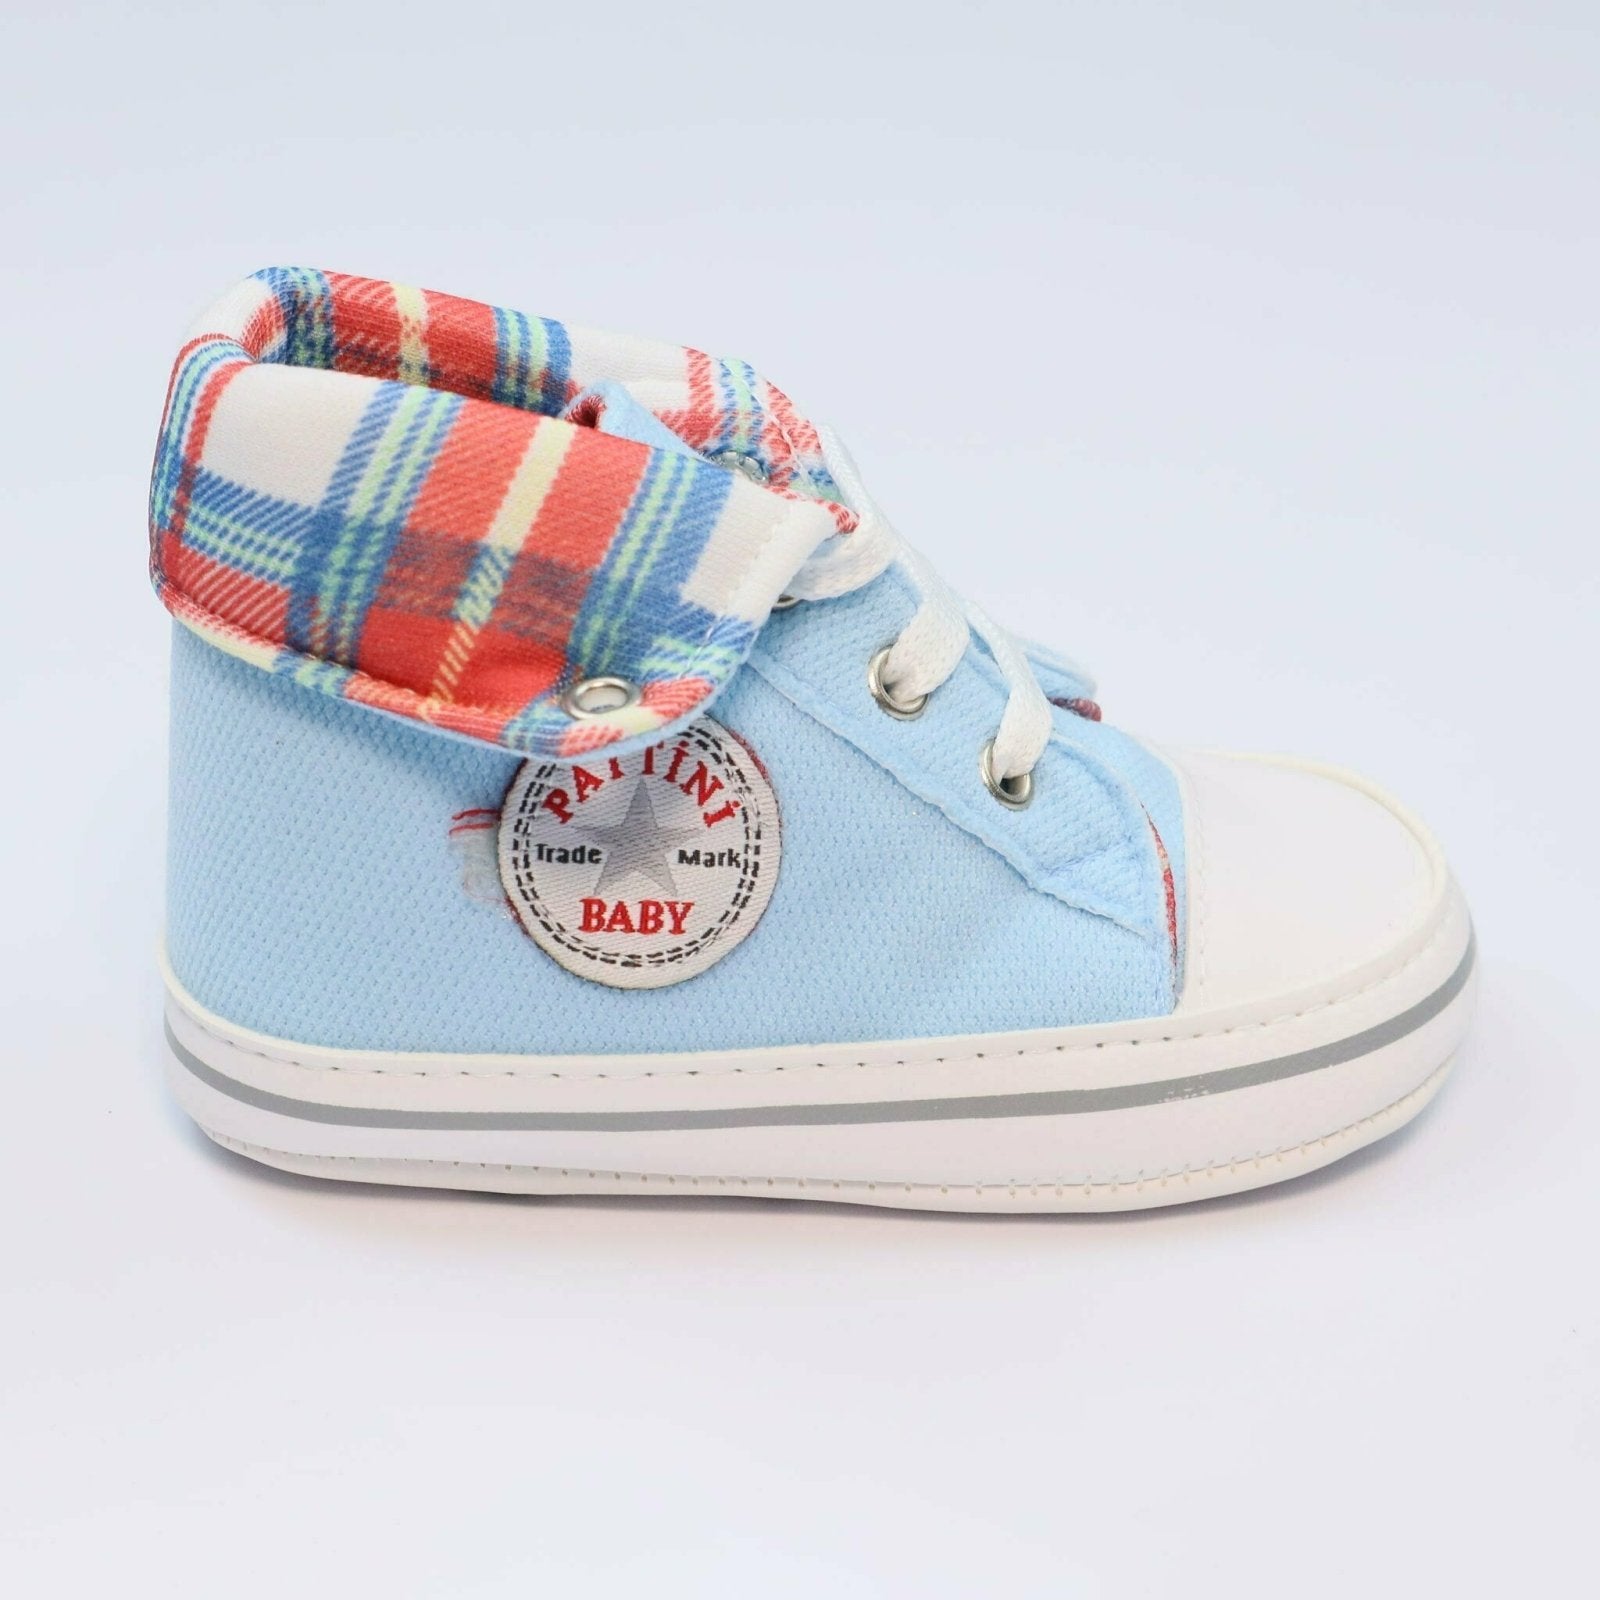 Baby Shoes Sky Blue Check Print by Baby Pattini